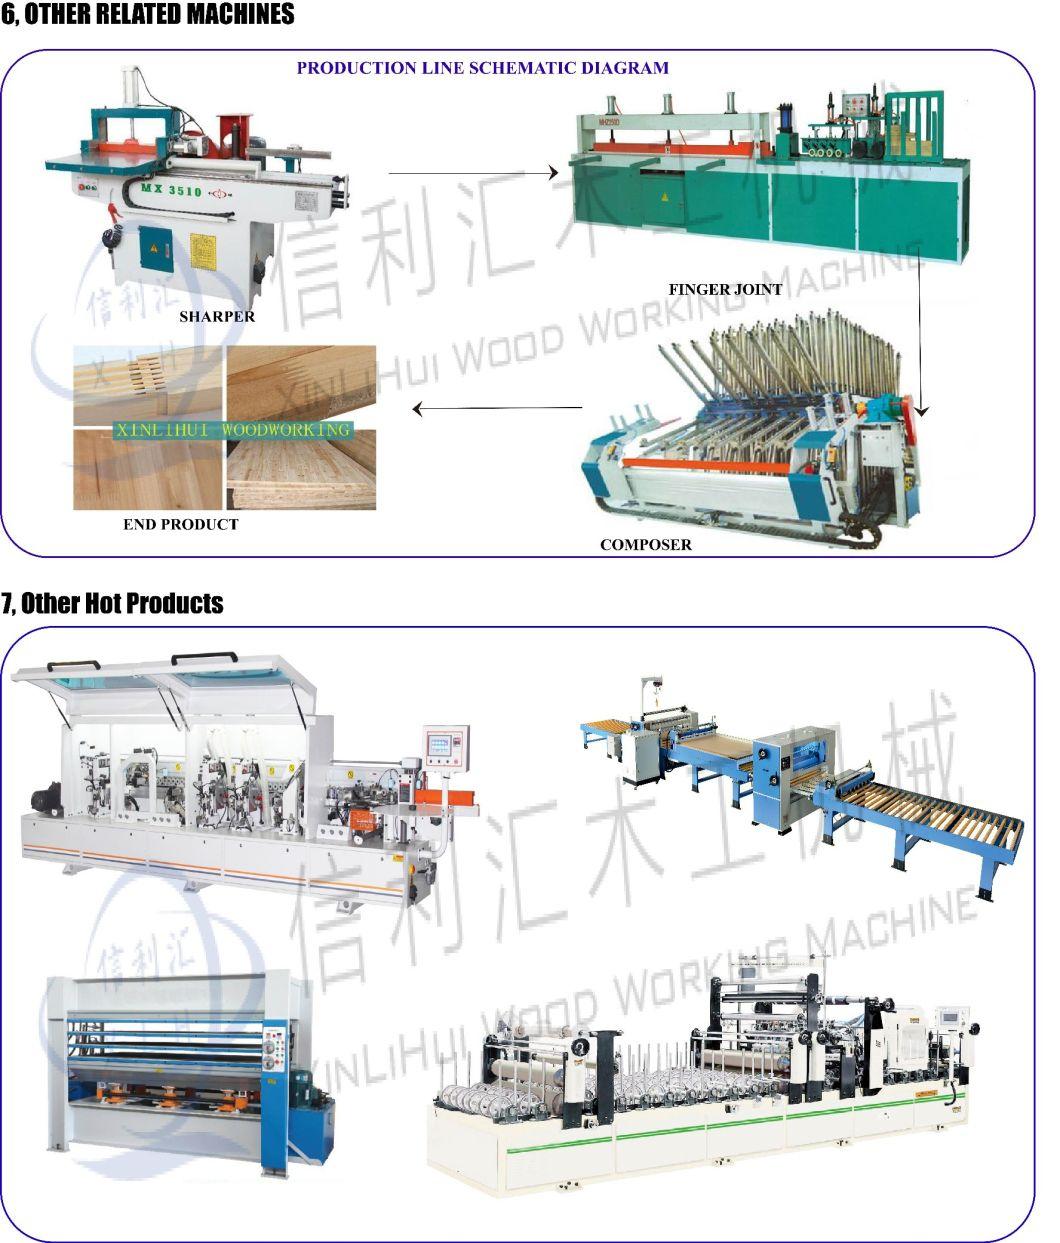 New Semi-Automatic Large Log Push Table Saw Woodworking Machine Log Push Table Saw Mechanical Equipment Feeding Strong Febrication Machineries,